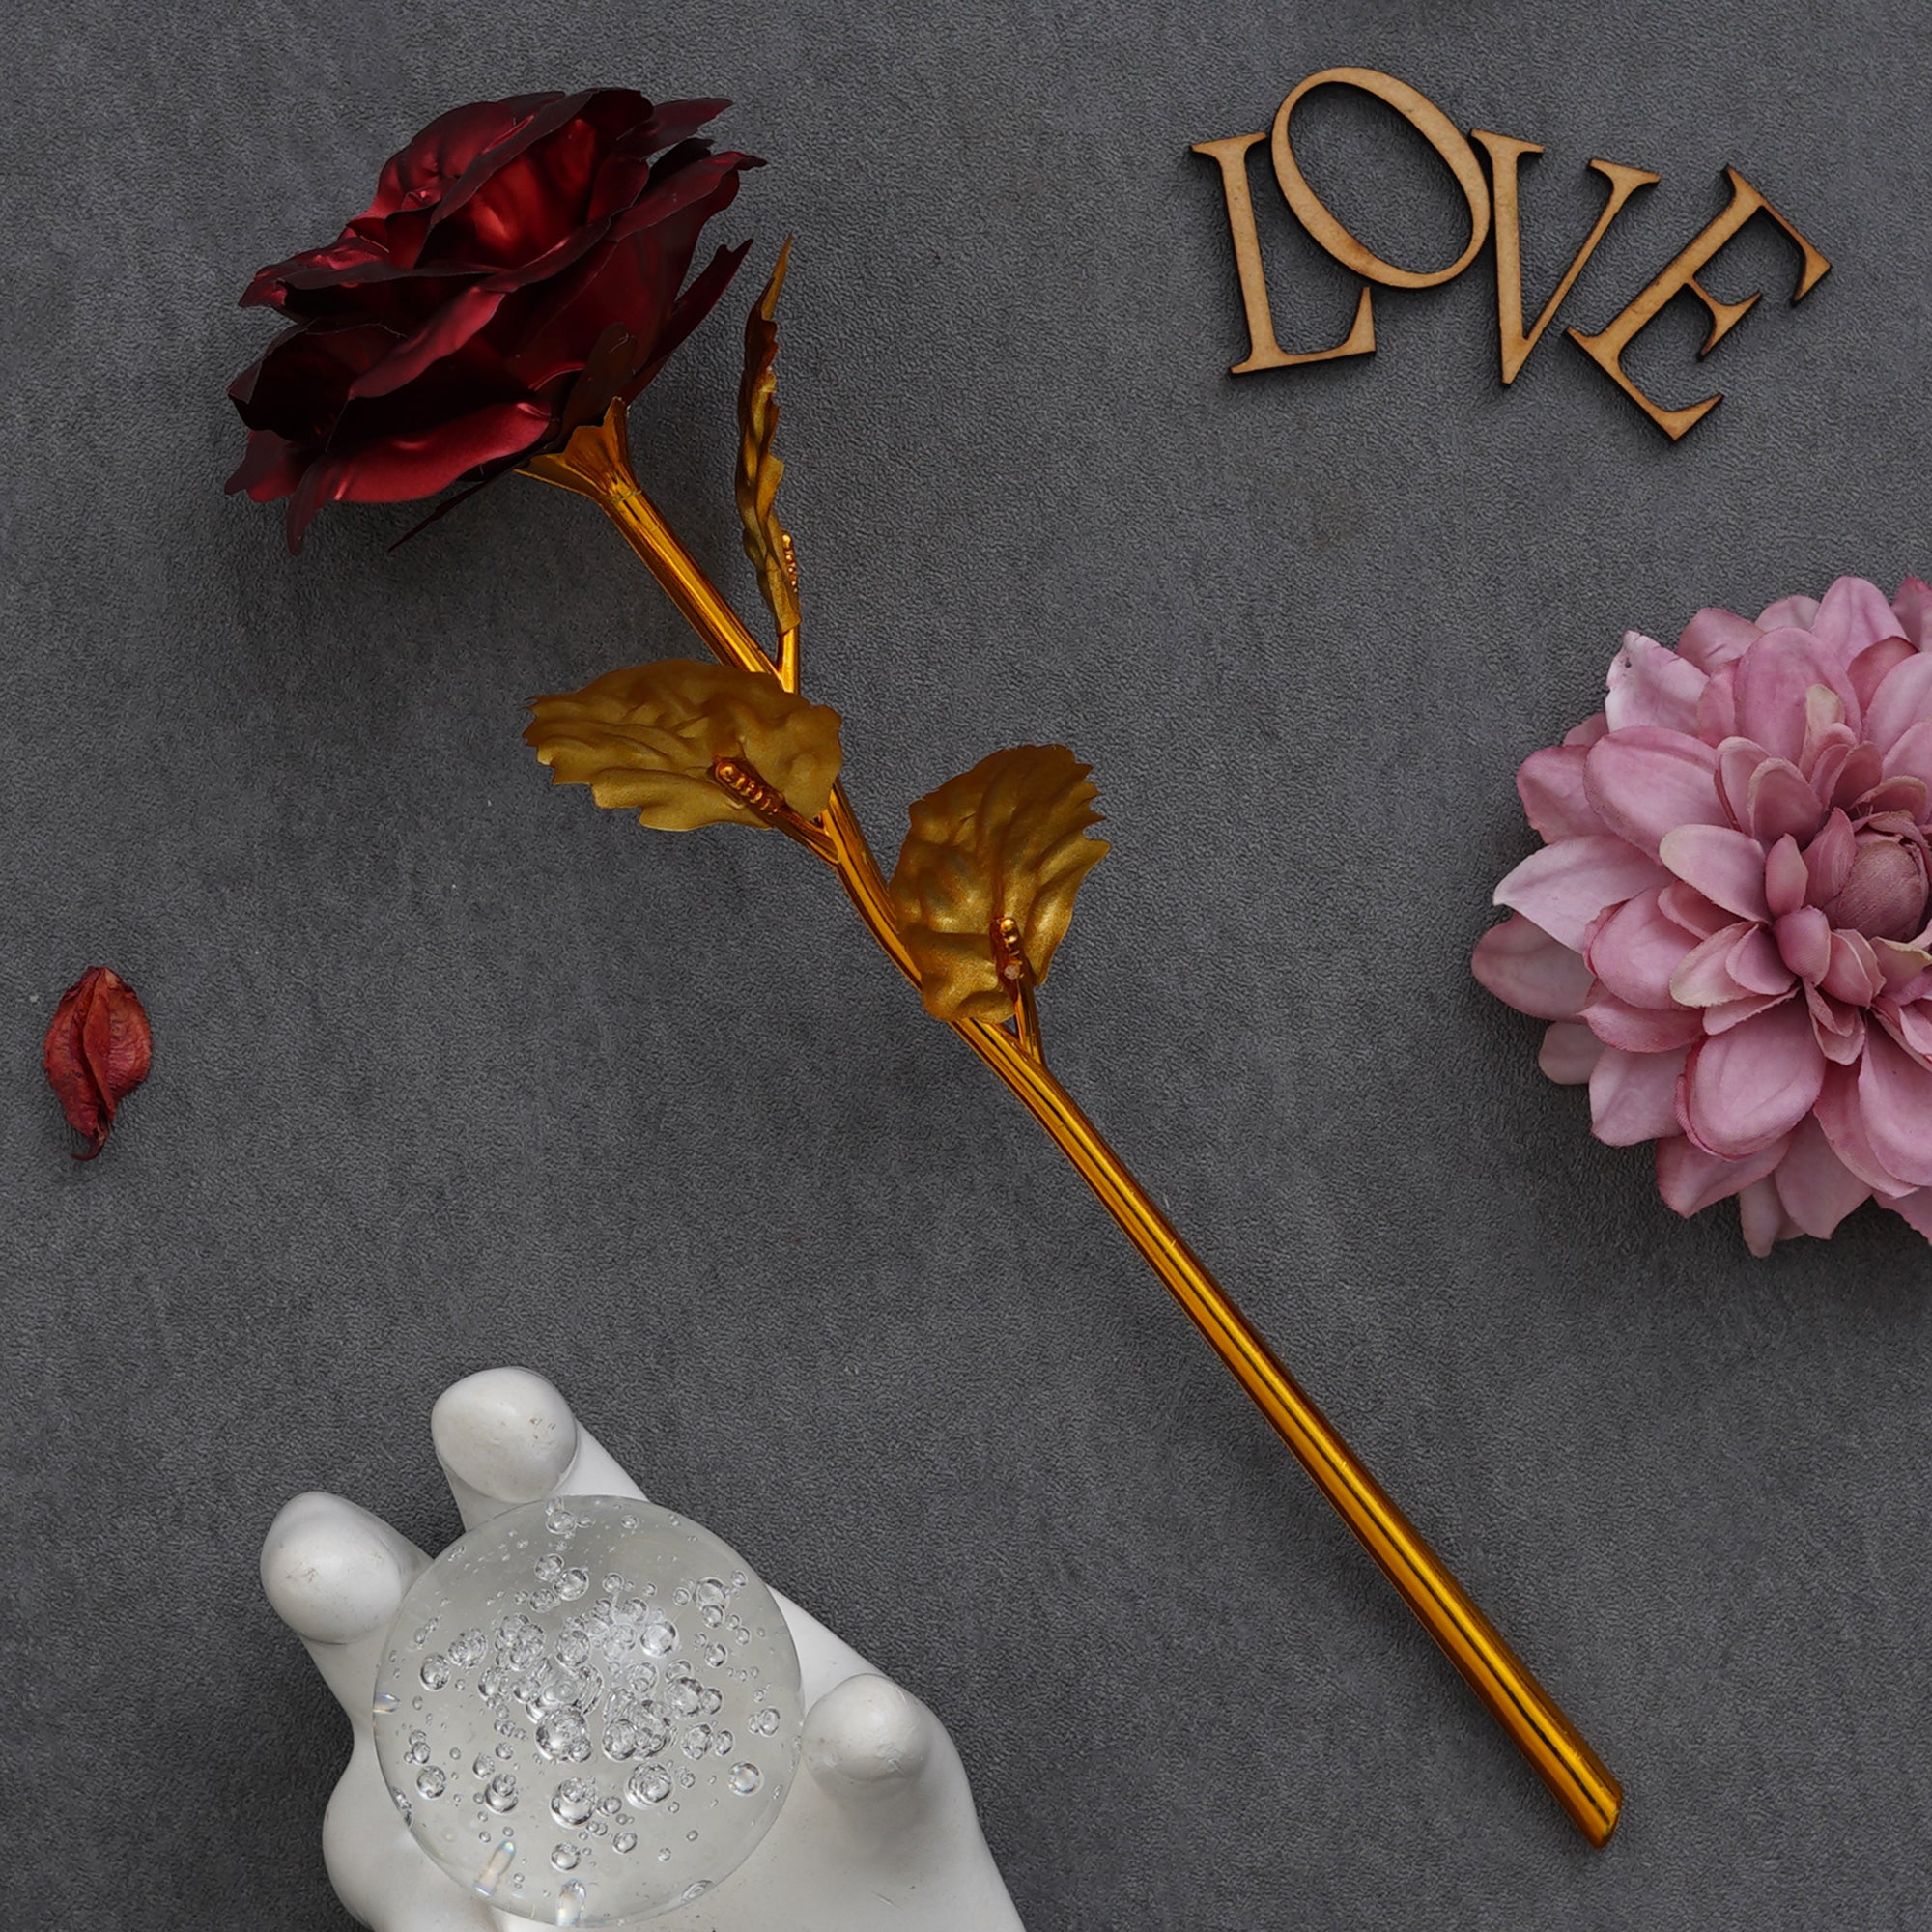 Valentine Combo of Golden Red Rose Gift Set, "Love You" Wooden Showpiece With Stand, Bride Kissing Groom Romantic Polyresin Decorative Showpiece 1